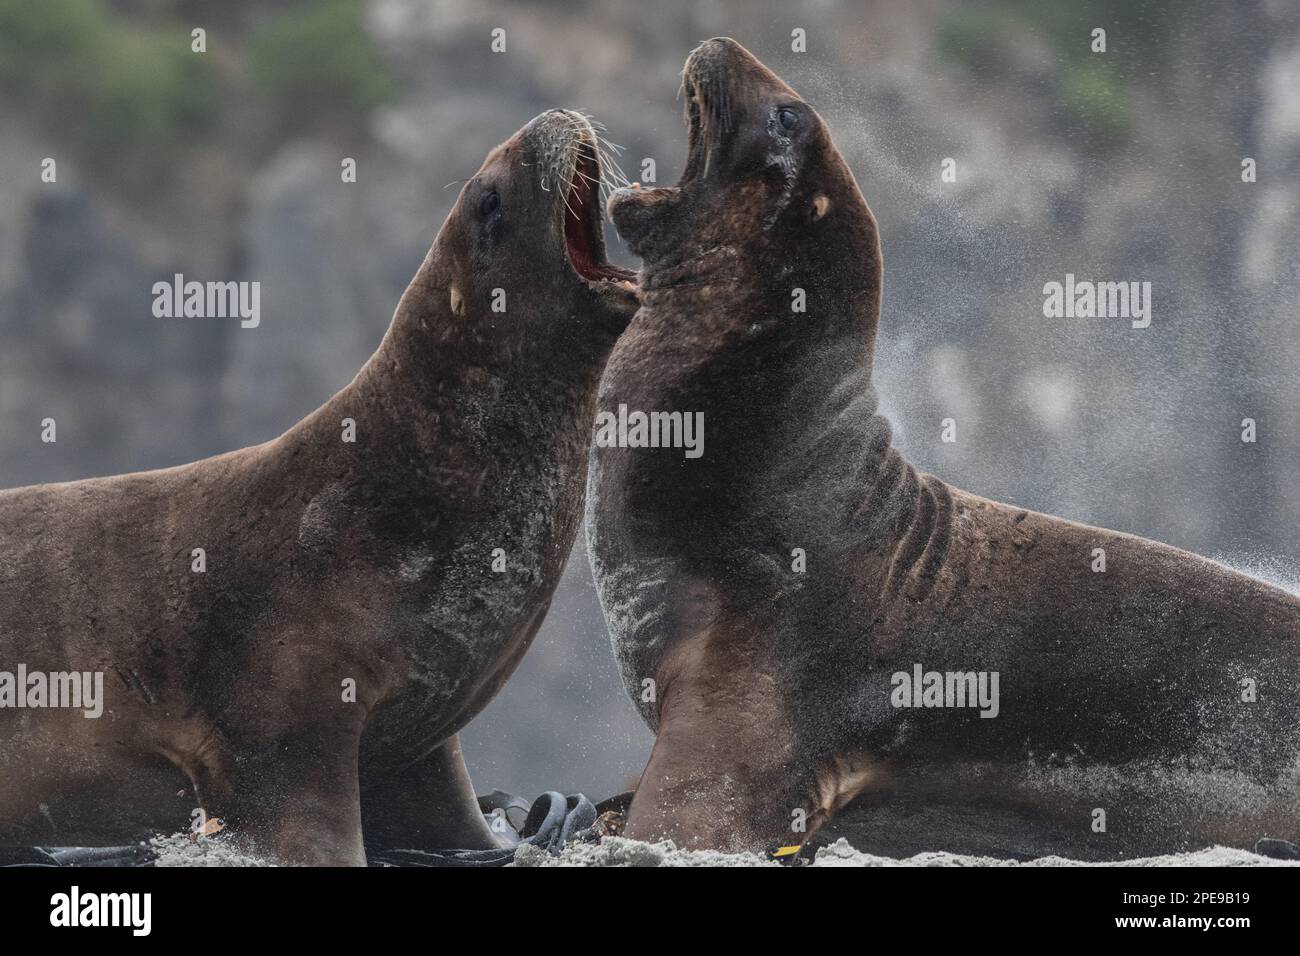 New Zealand sea lions (Phocarctos hookeri), a pair of males fighting - considered the most endangered sea lion species, found in Aotearoa. Stock Photo